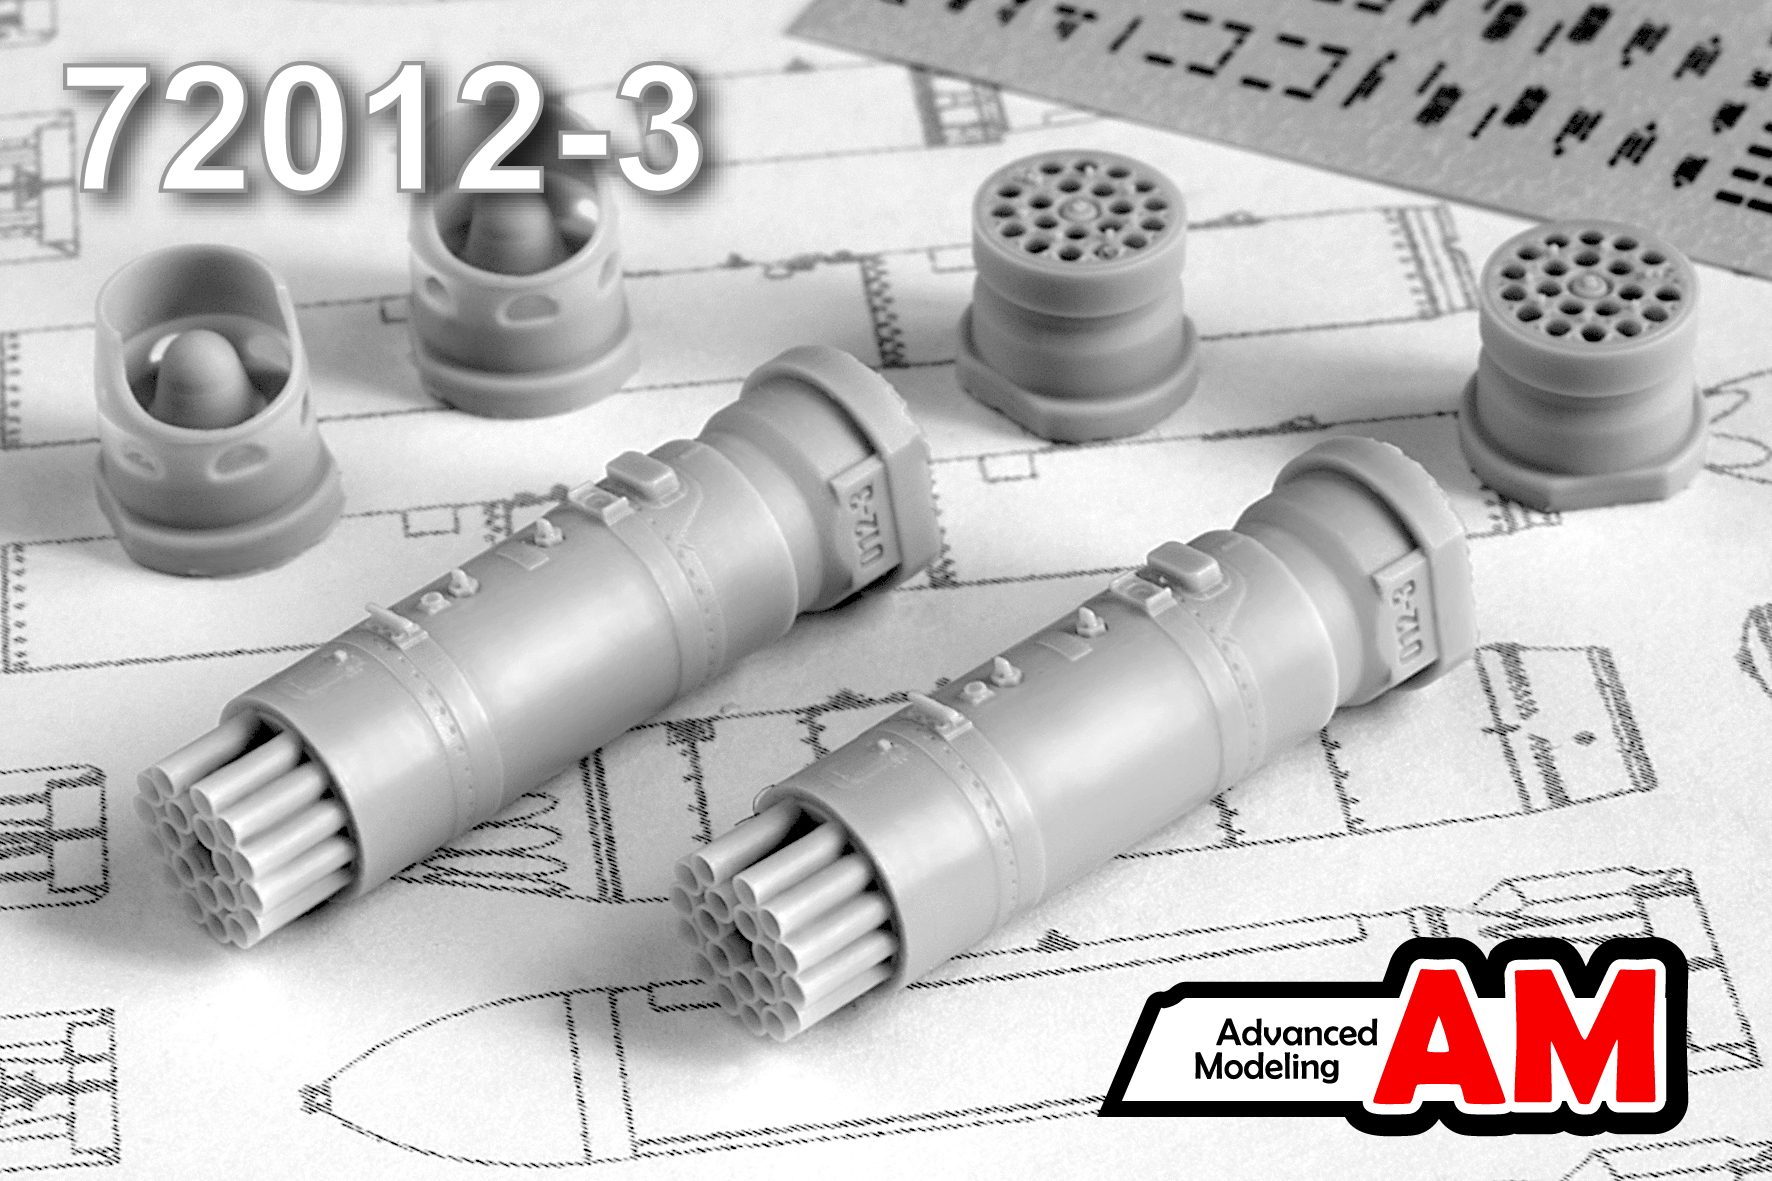 Additions (3D resin printing) 1/72 B-8B20 Block of unguided aviation missiles (Advanced Modeling) 